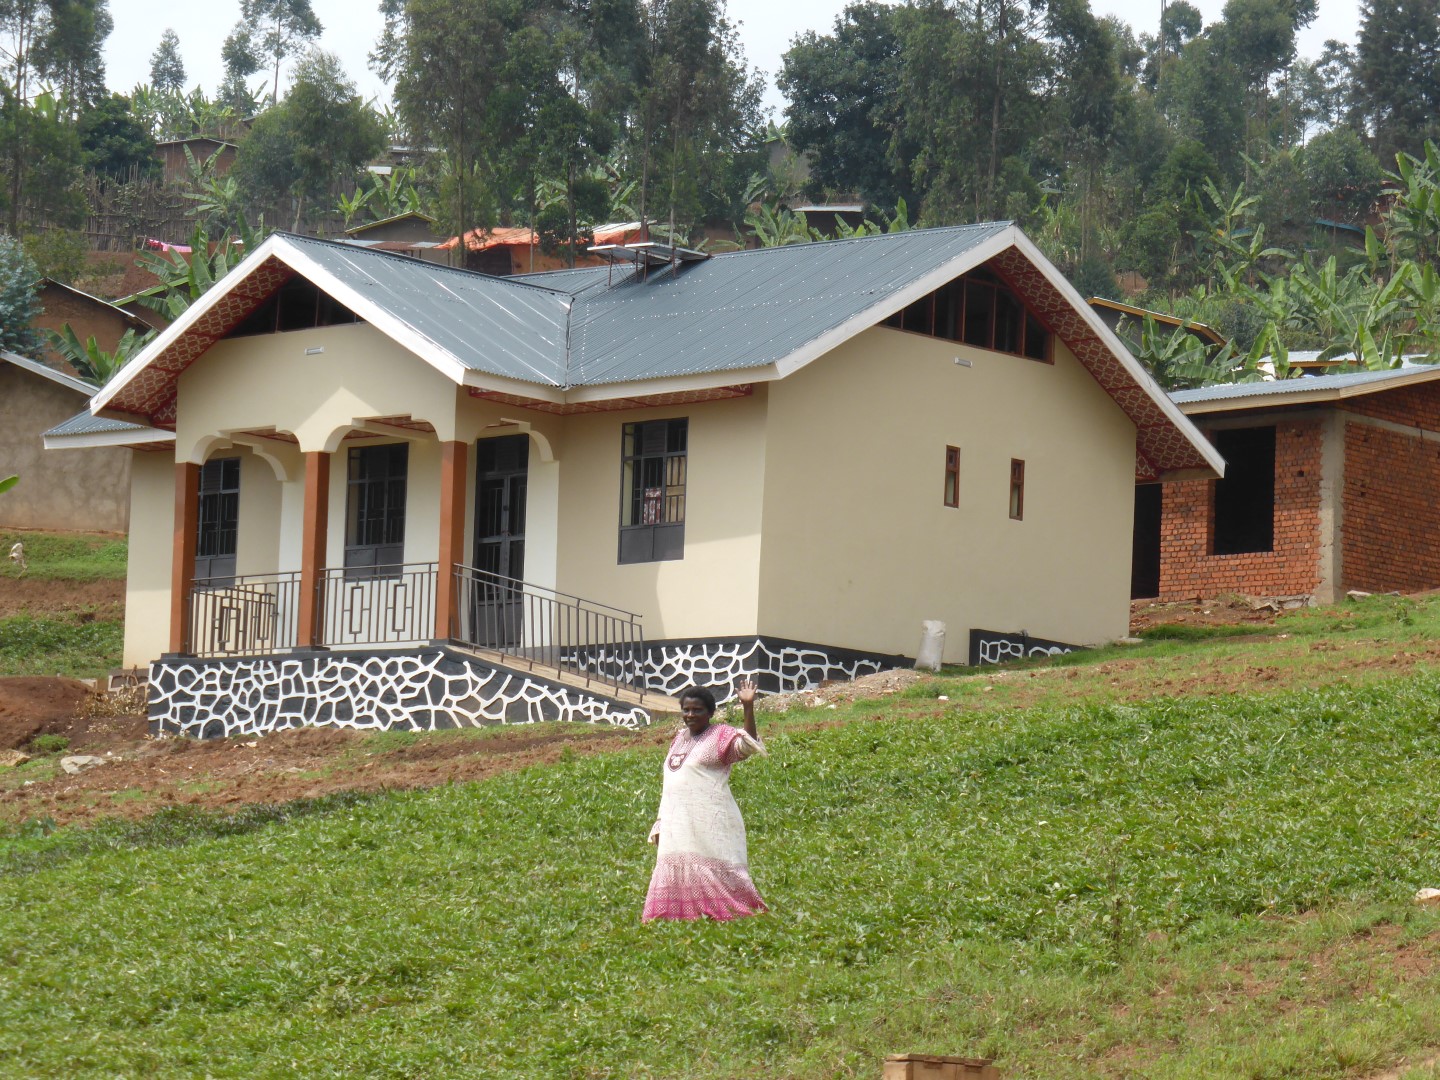 Help us build a new house for orphans